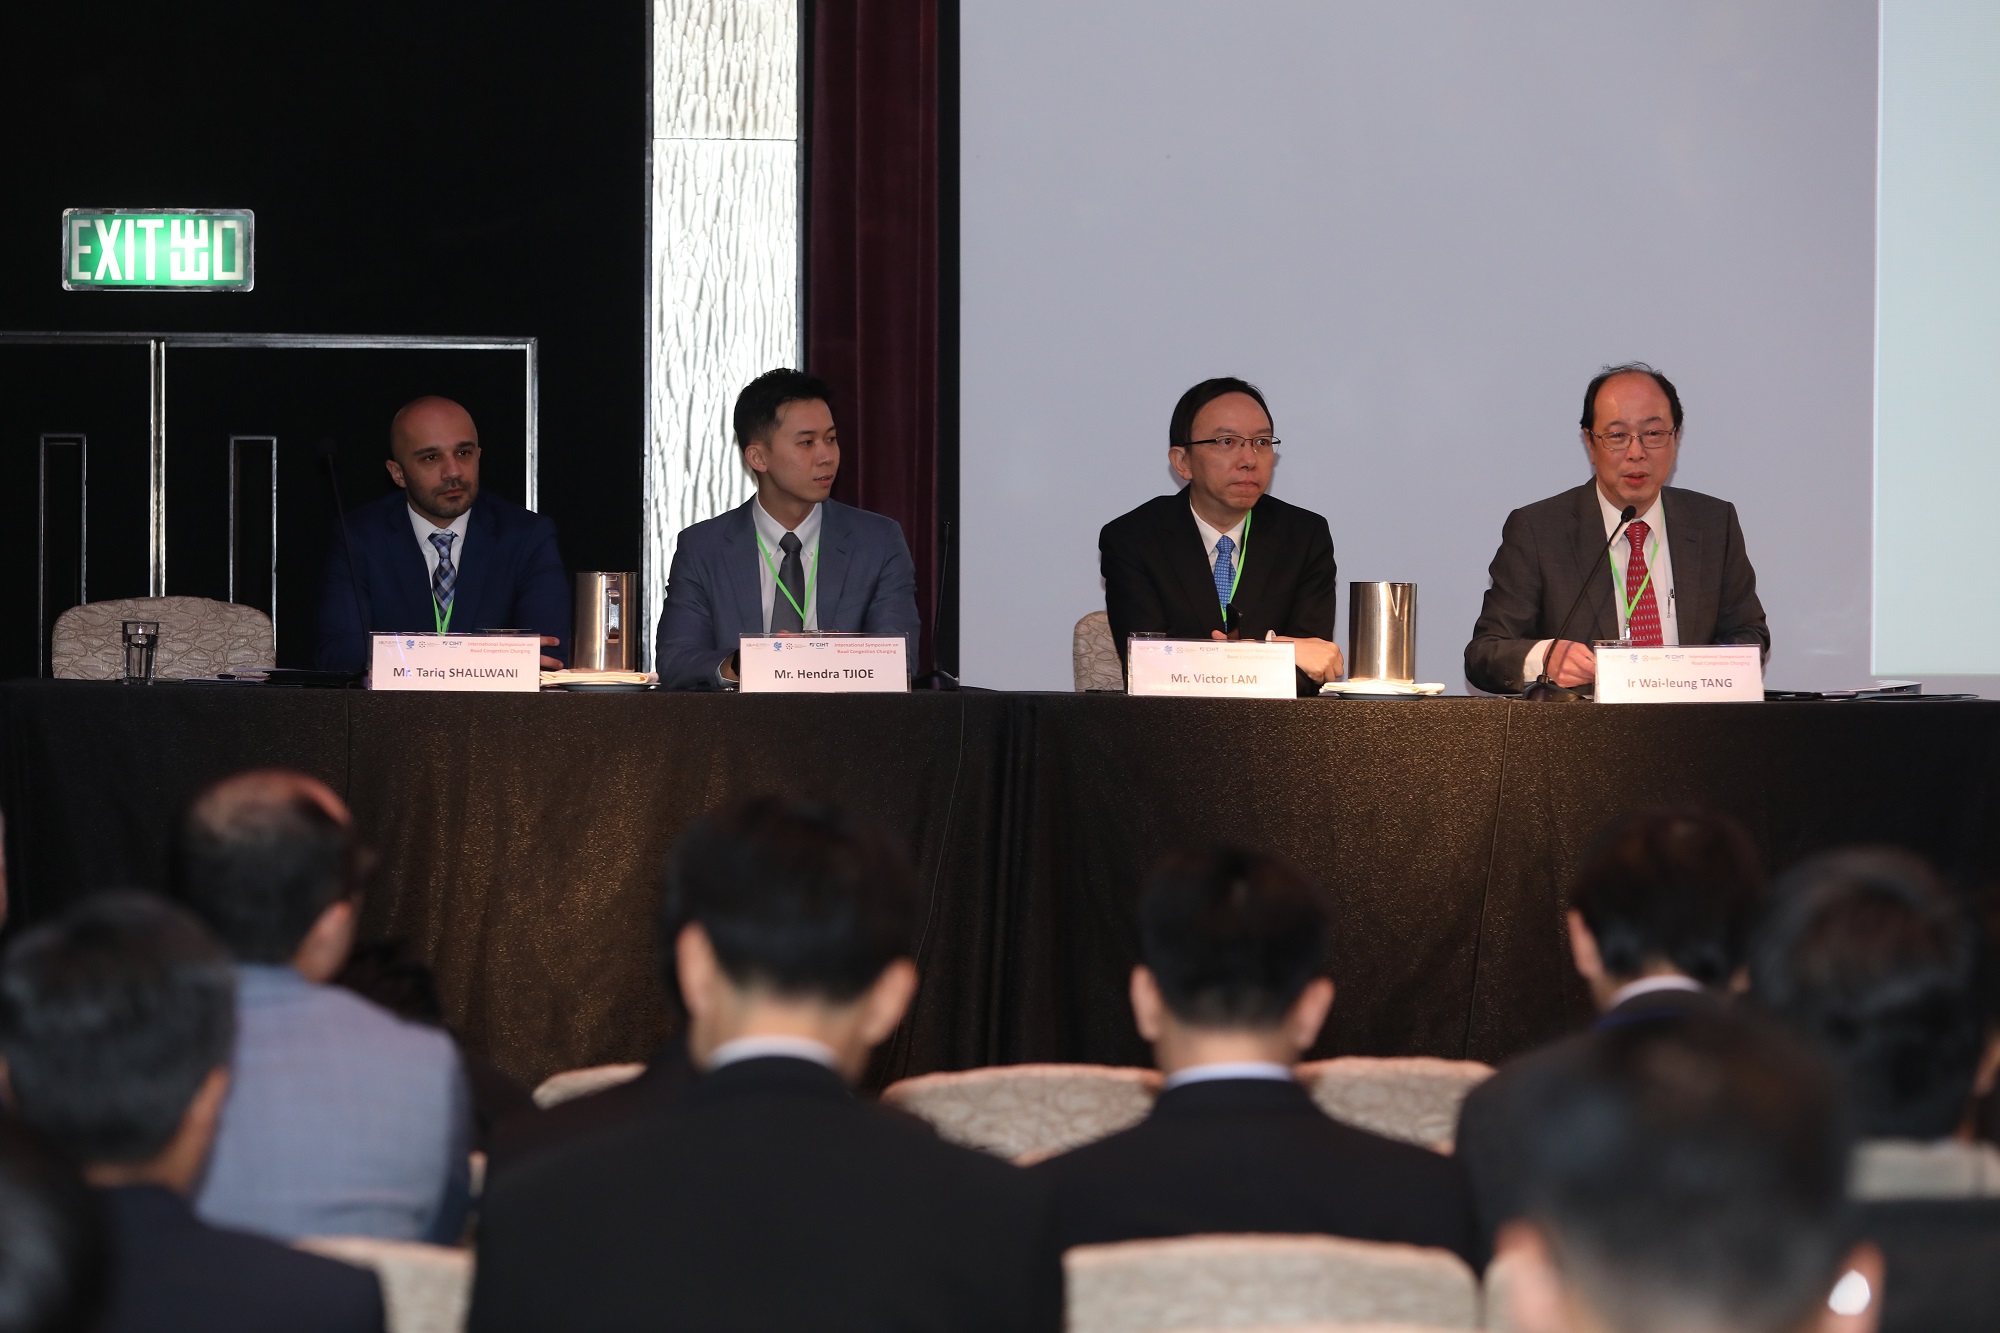 Mr. Victor Lam, Government Chief Information Officer (second right), Ir. Wai-leung Tang, Deputy Commissioner/Planning and Technical Services, Transport Department (first right), and other guests respond to questions from the floor at the “International Symposium on Road Congestion Charging”.